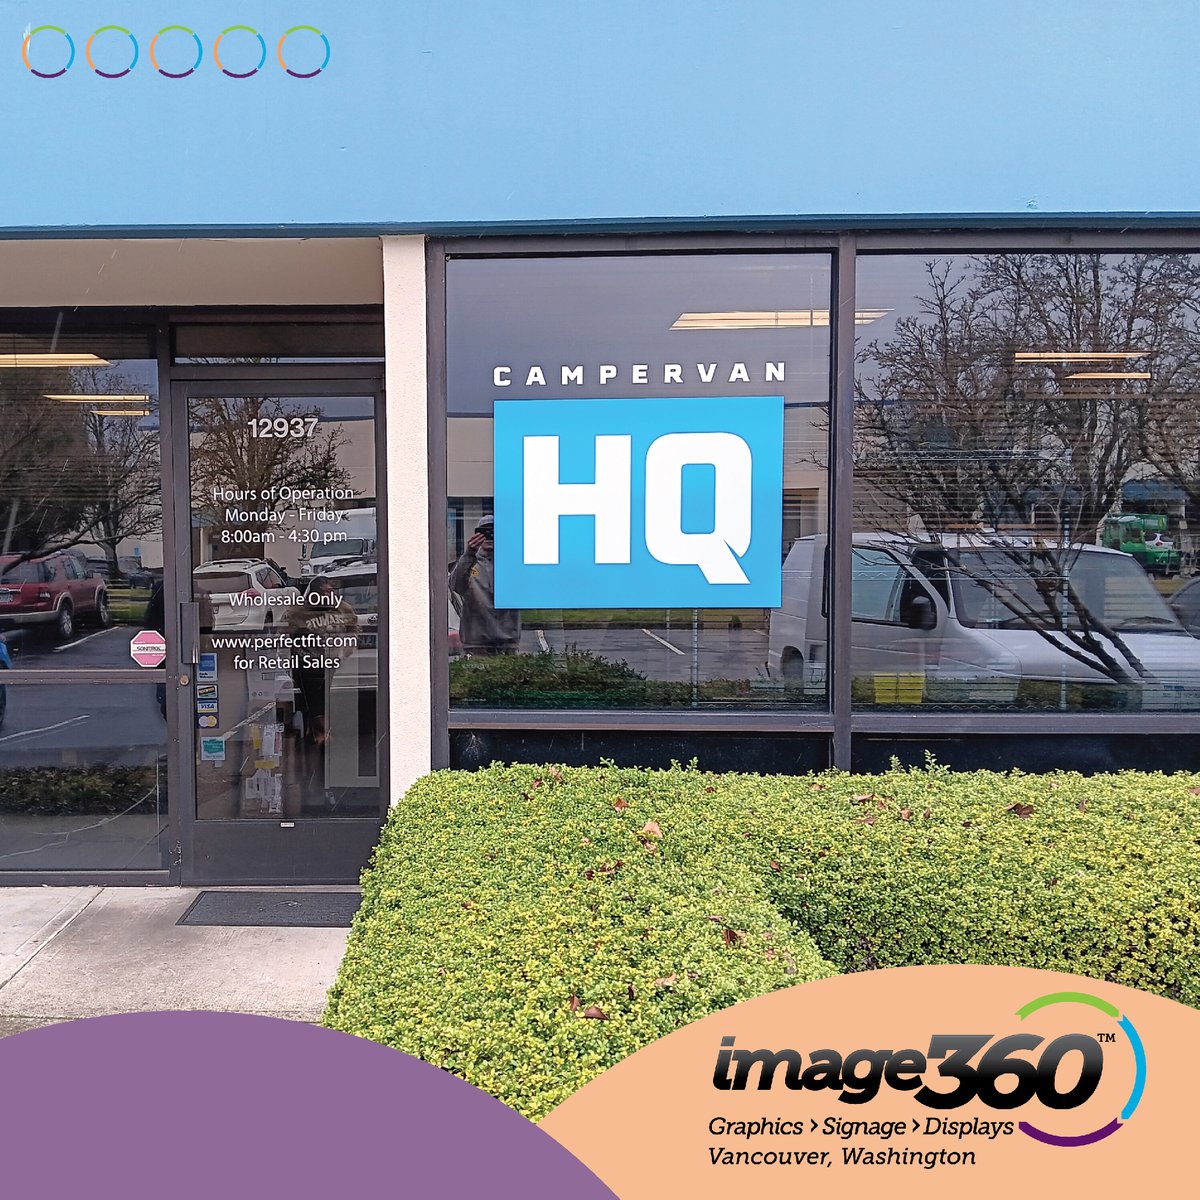 Front window Campervan HQ decal for Perfect Fit!
#image360 #image360vancouver #vancouverwa #clarkcounty #portland #signage #graphics #displays #sign #windowgraphics #vinylgraphics #vinylwrap #sticker #decal #branding #marketing #storefrontsignage